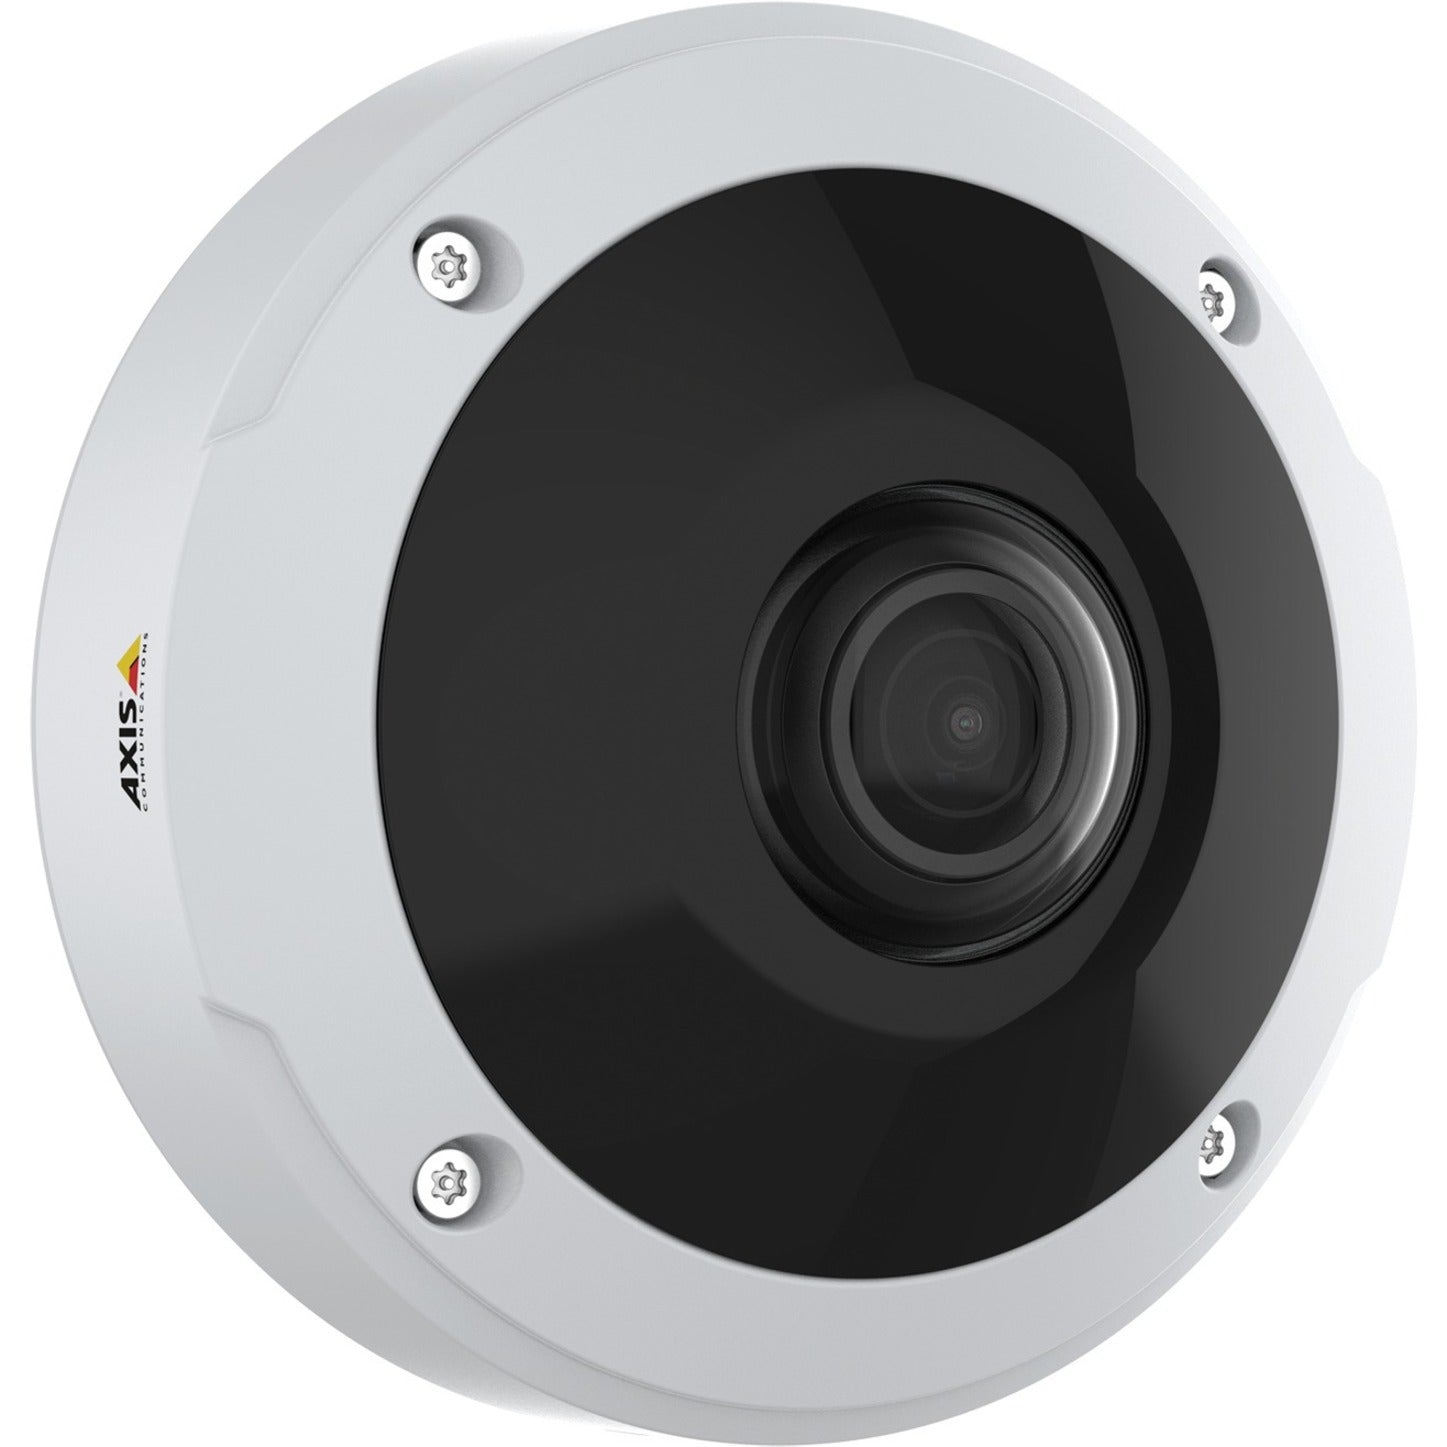 AXIS 02109-001 M3057-PLVE Mk II Network Camera, 6 Megapixel Indoor/Outdoor Dome, Color, PTZ, Motion Detection, SD Card Local Storage, HTTPS Encryption, Password Protection, Privacy Masking, Auto Gain Control, Day/Night, Tampering Alarm